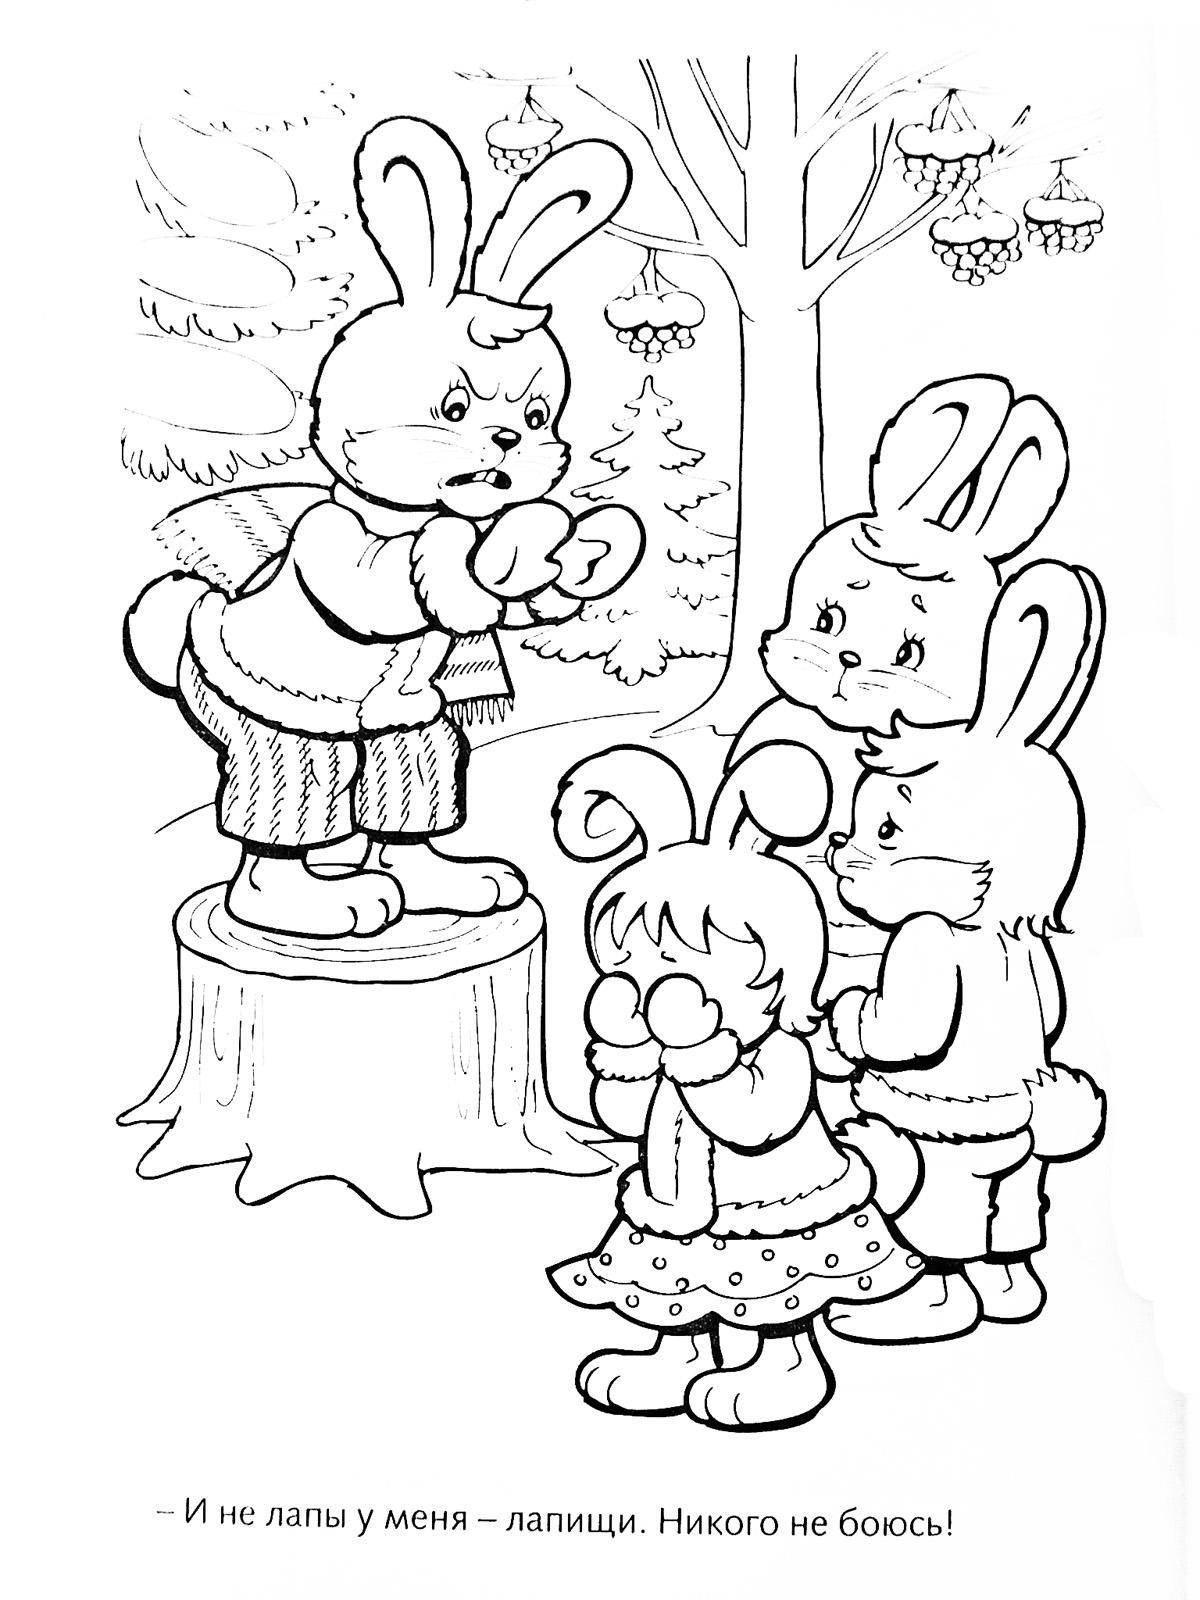 Coloring Picture of scared bunnies. Category Pets allowed. Tags:  hare, rabbit.